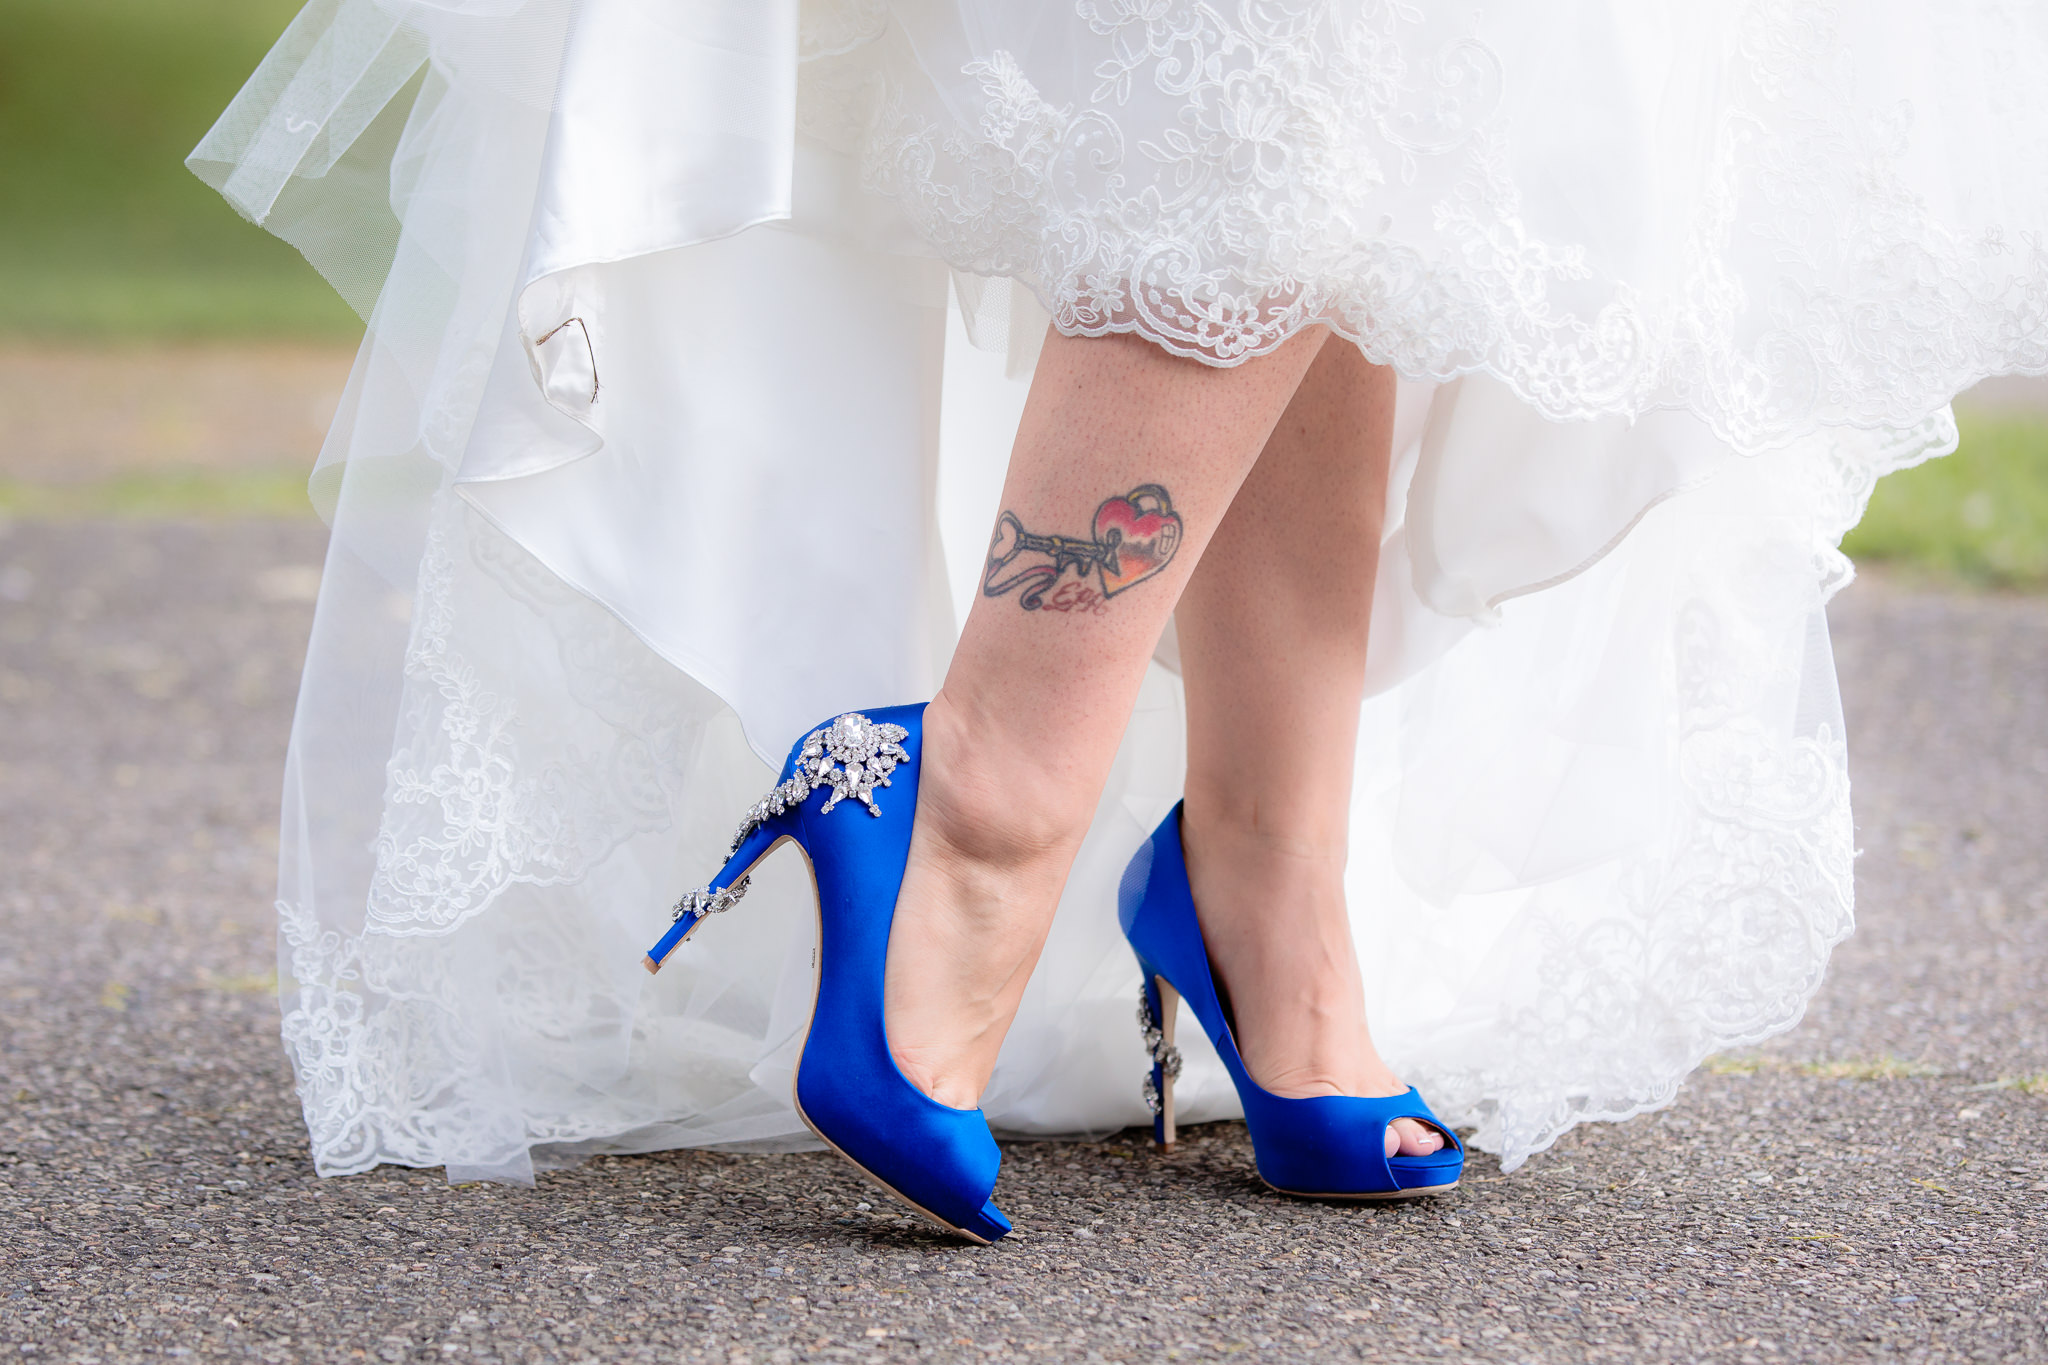 Bride shows off her royal blue Badgley Mischka wedding shoes before her National Aviary wedding